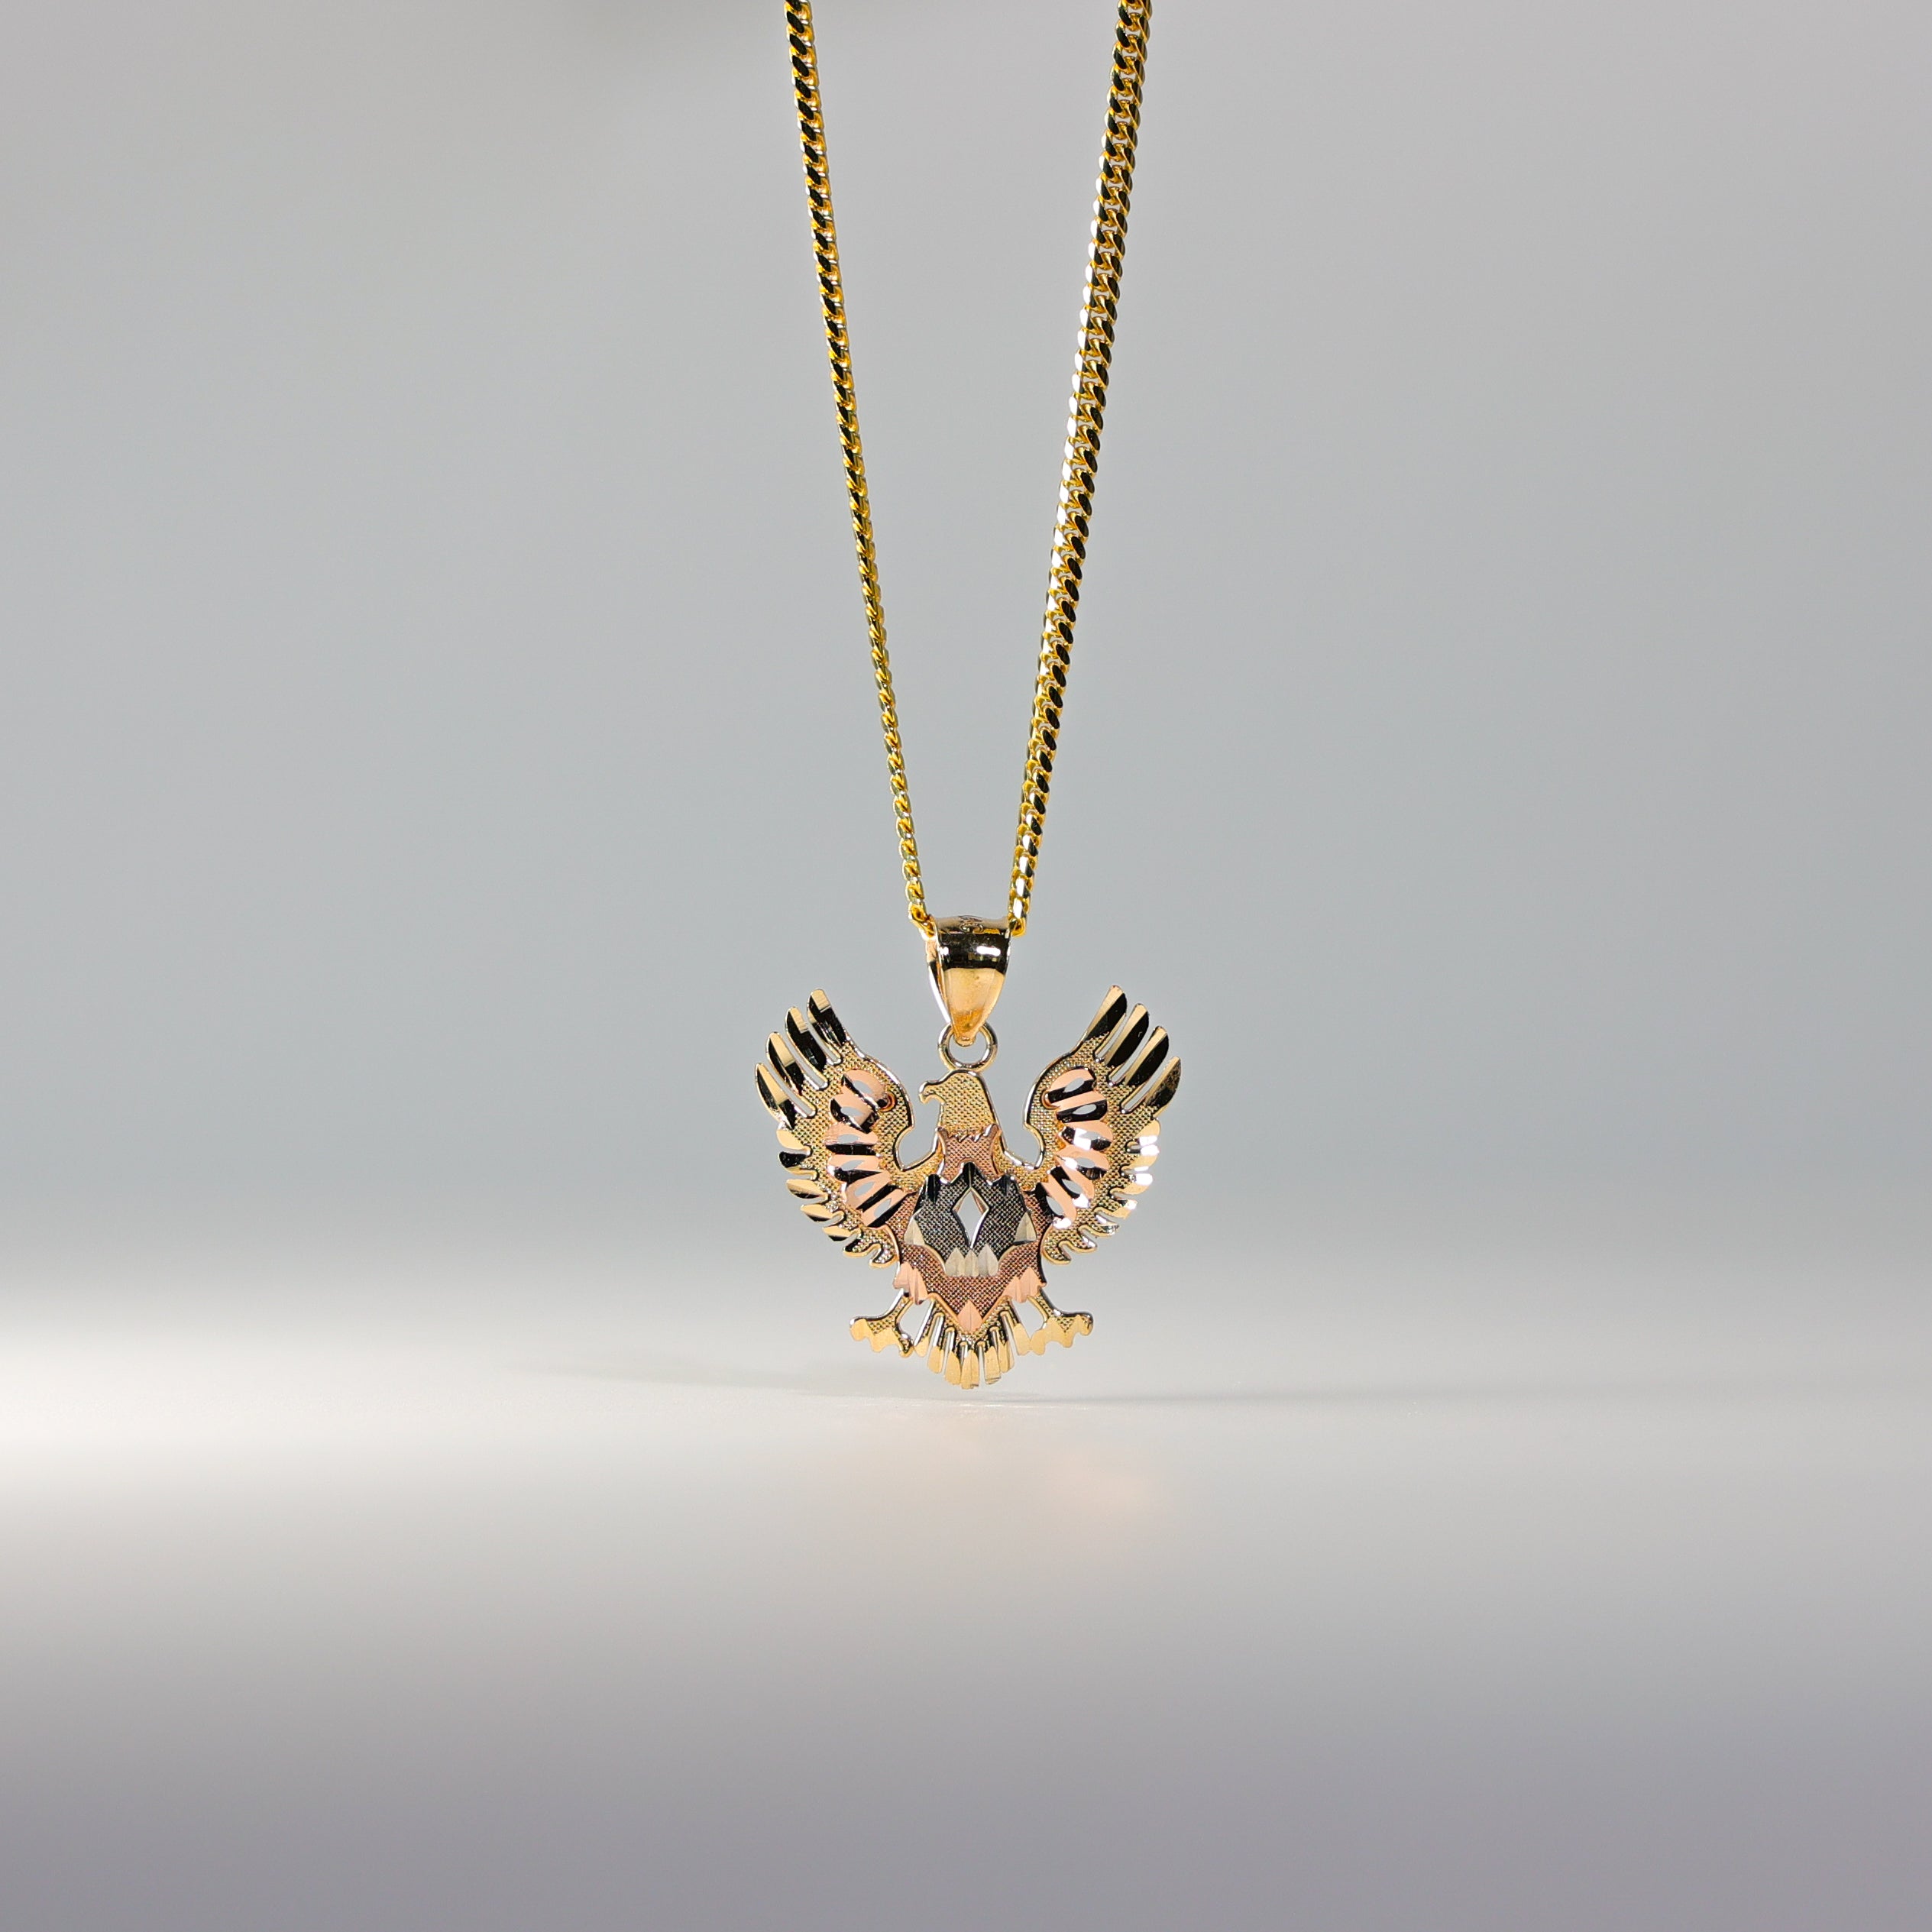 Gold Eagle Pendant Model-1604 - Charlie & Co. Jewelry